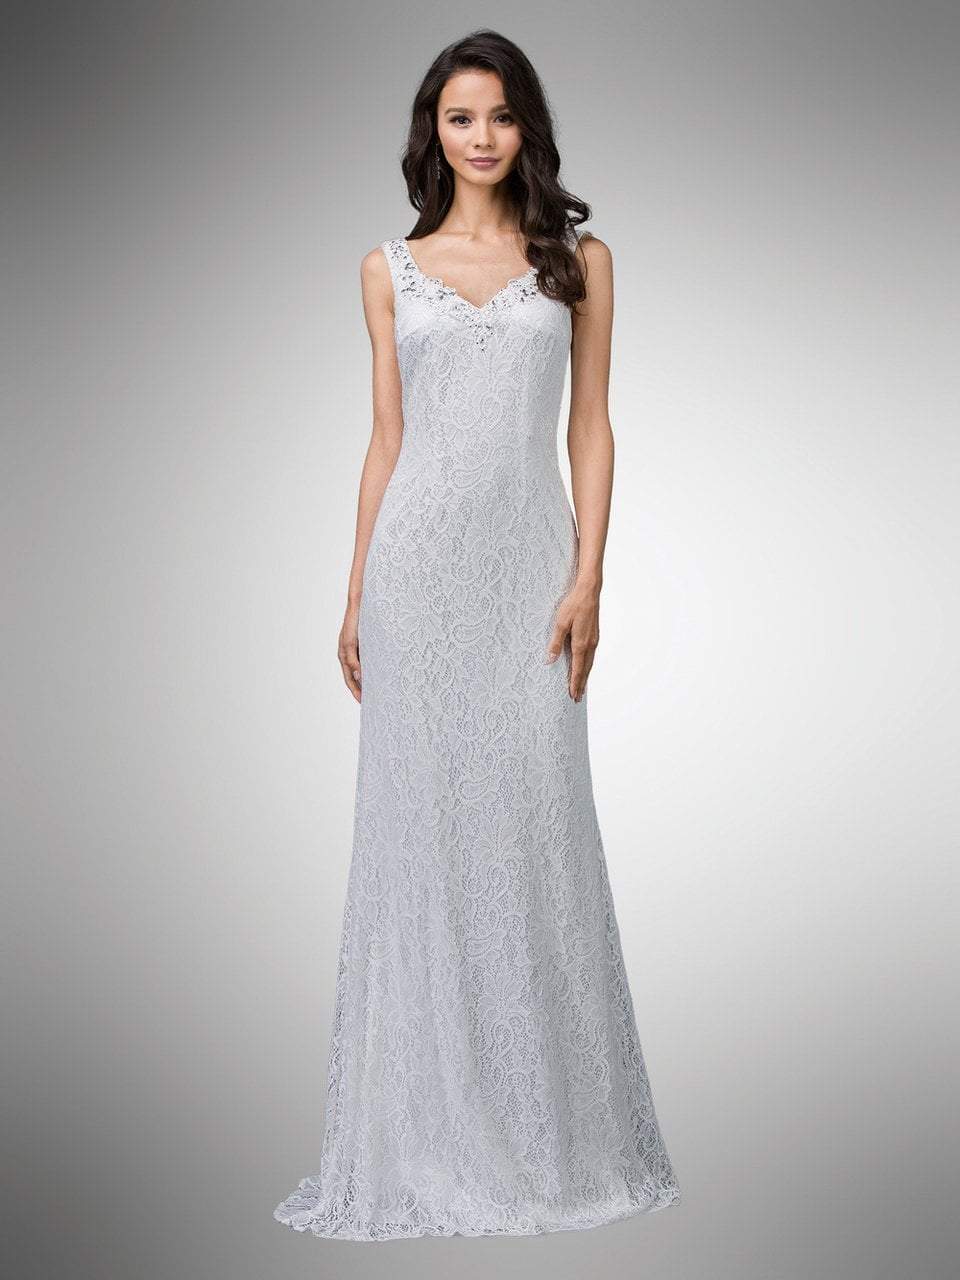 Dancing Queen Bridal - 9981 Bedazzled Lace V-neck Sheath Dress Bridal Dresses XS / Off White